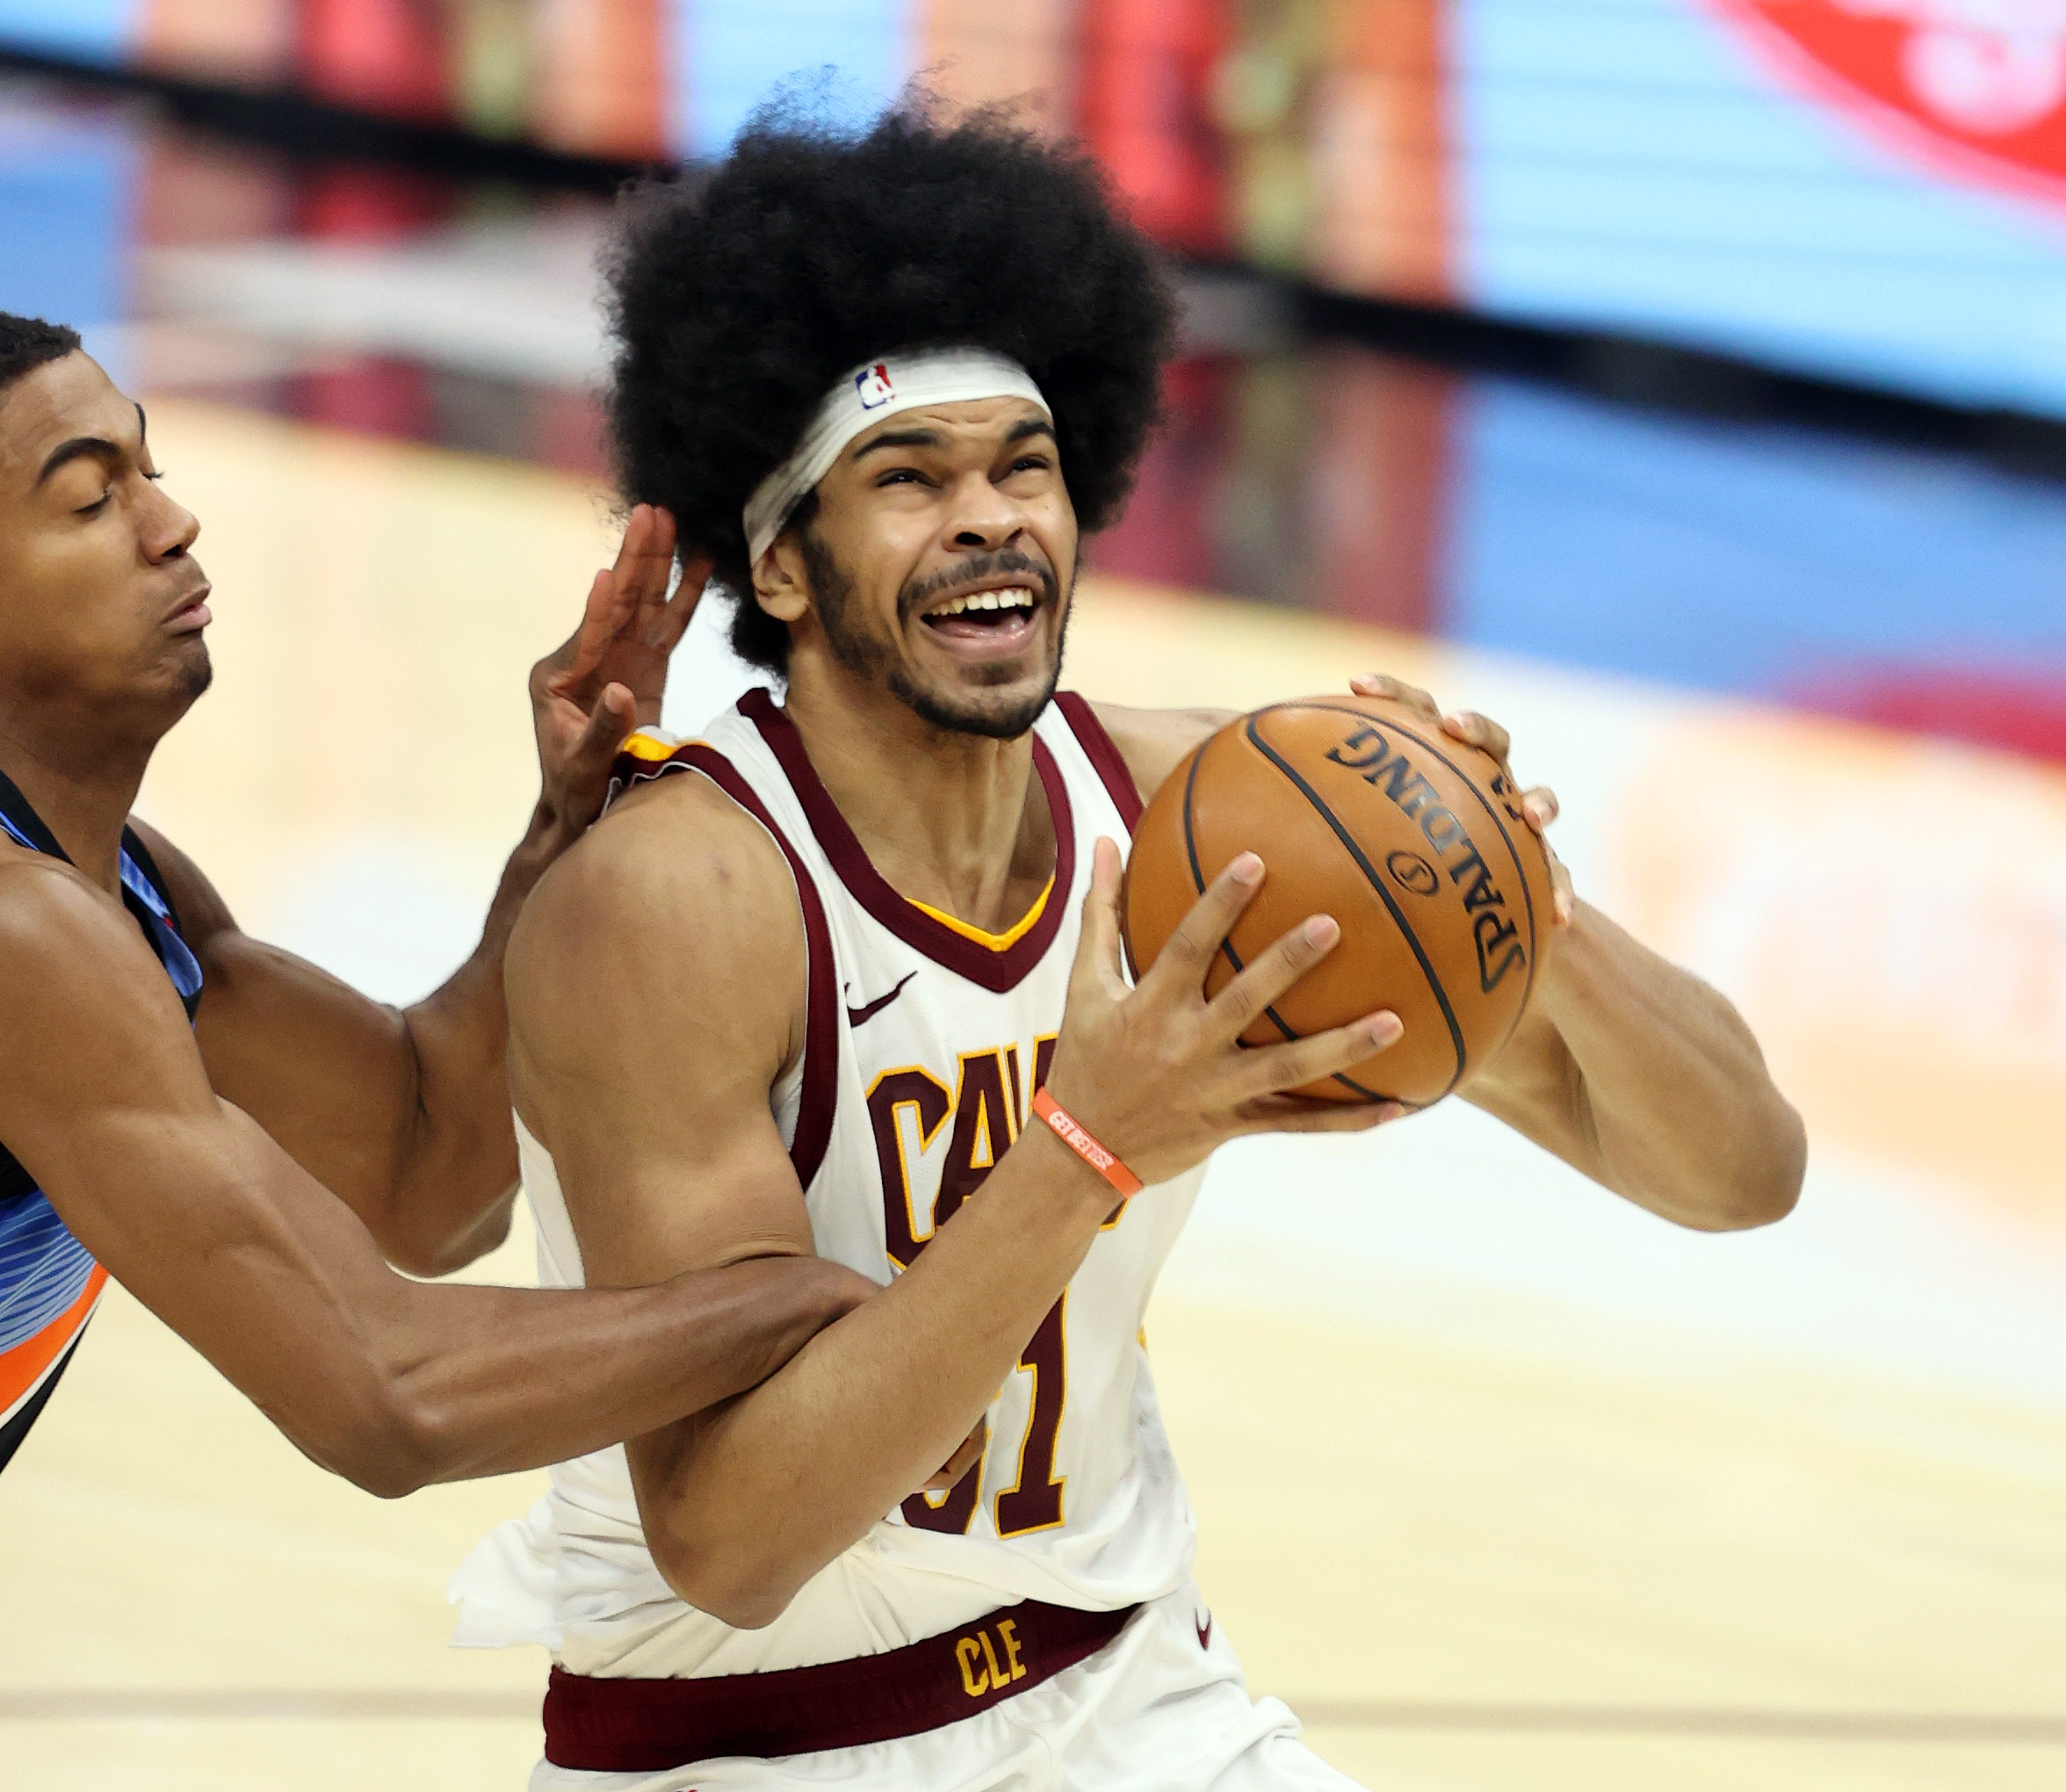 Jarrett Allen 'feeling great' after concussion that sidelined him for more than two weeks - cleveland.com